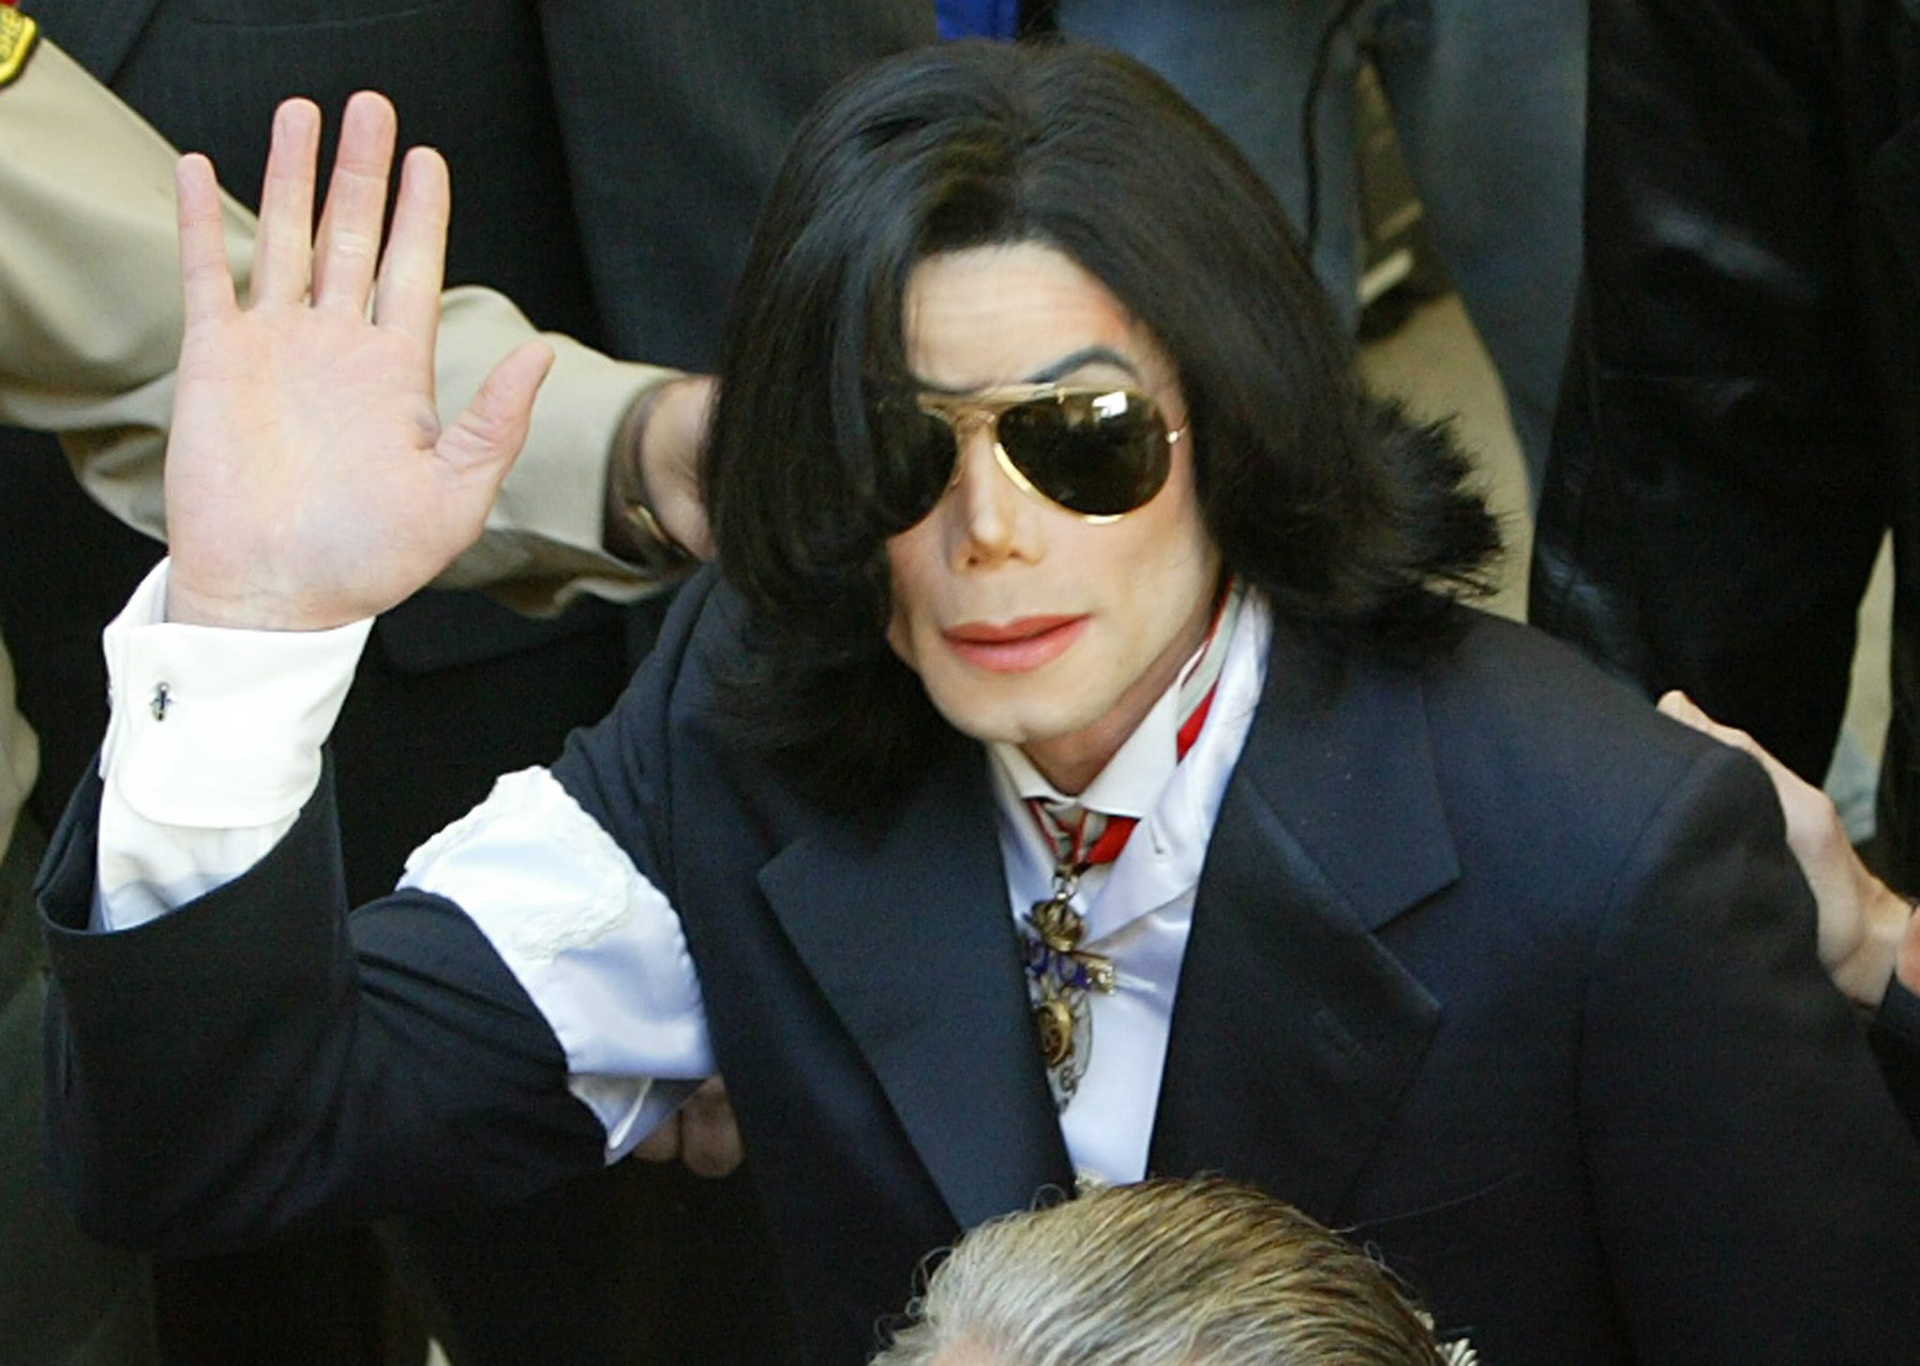 Michael Jackson would have turned 60